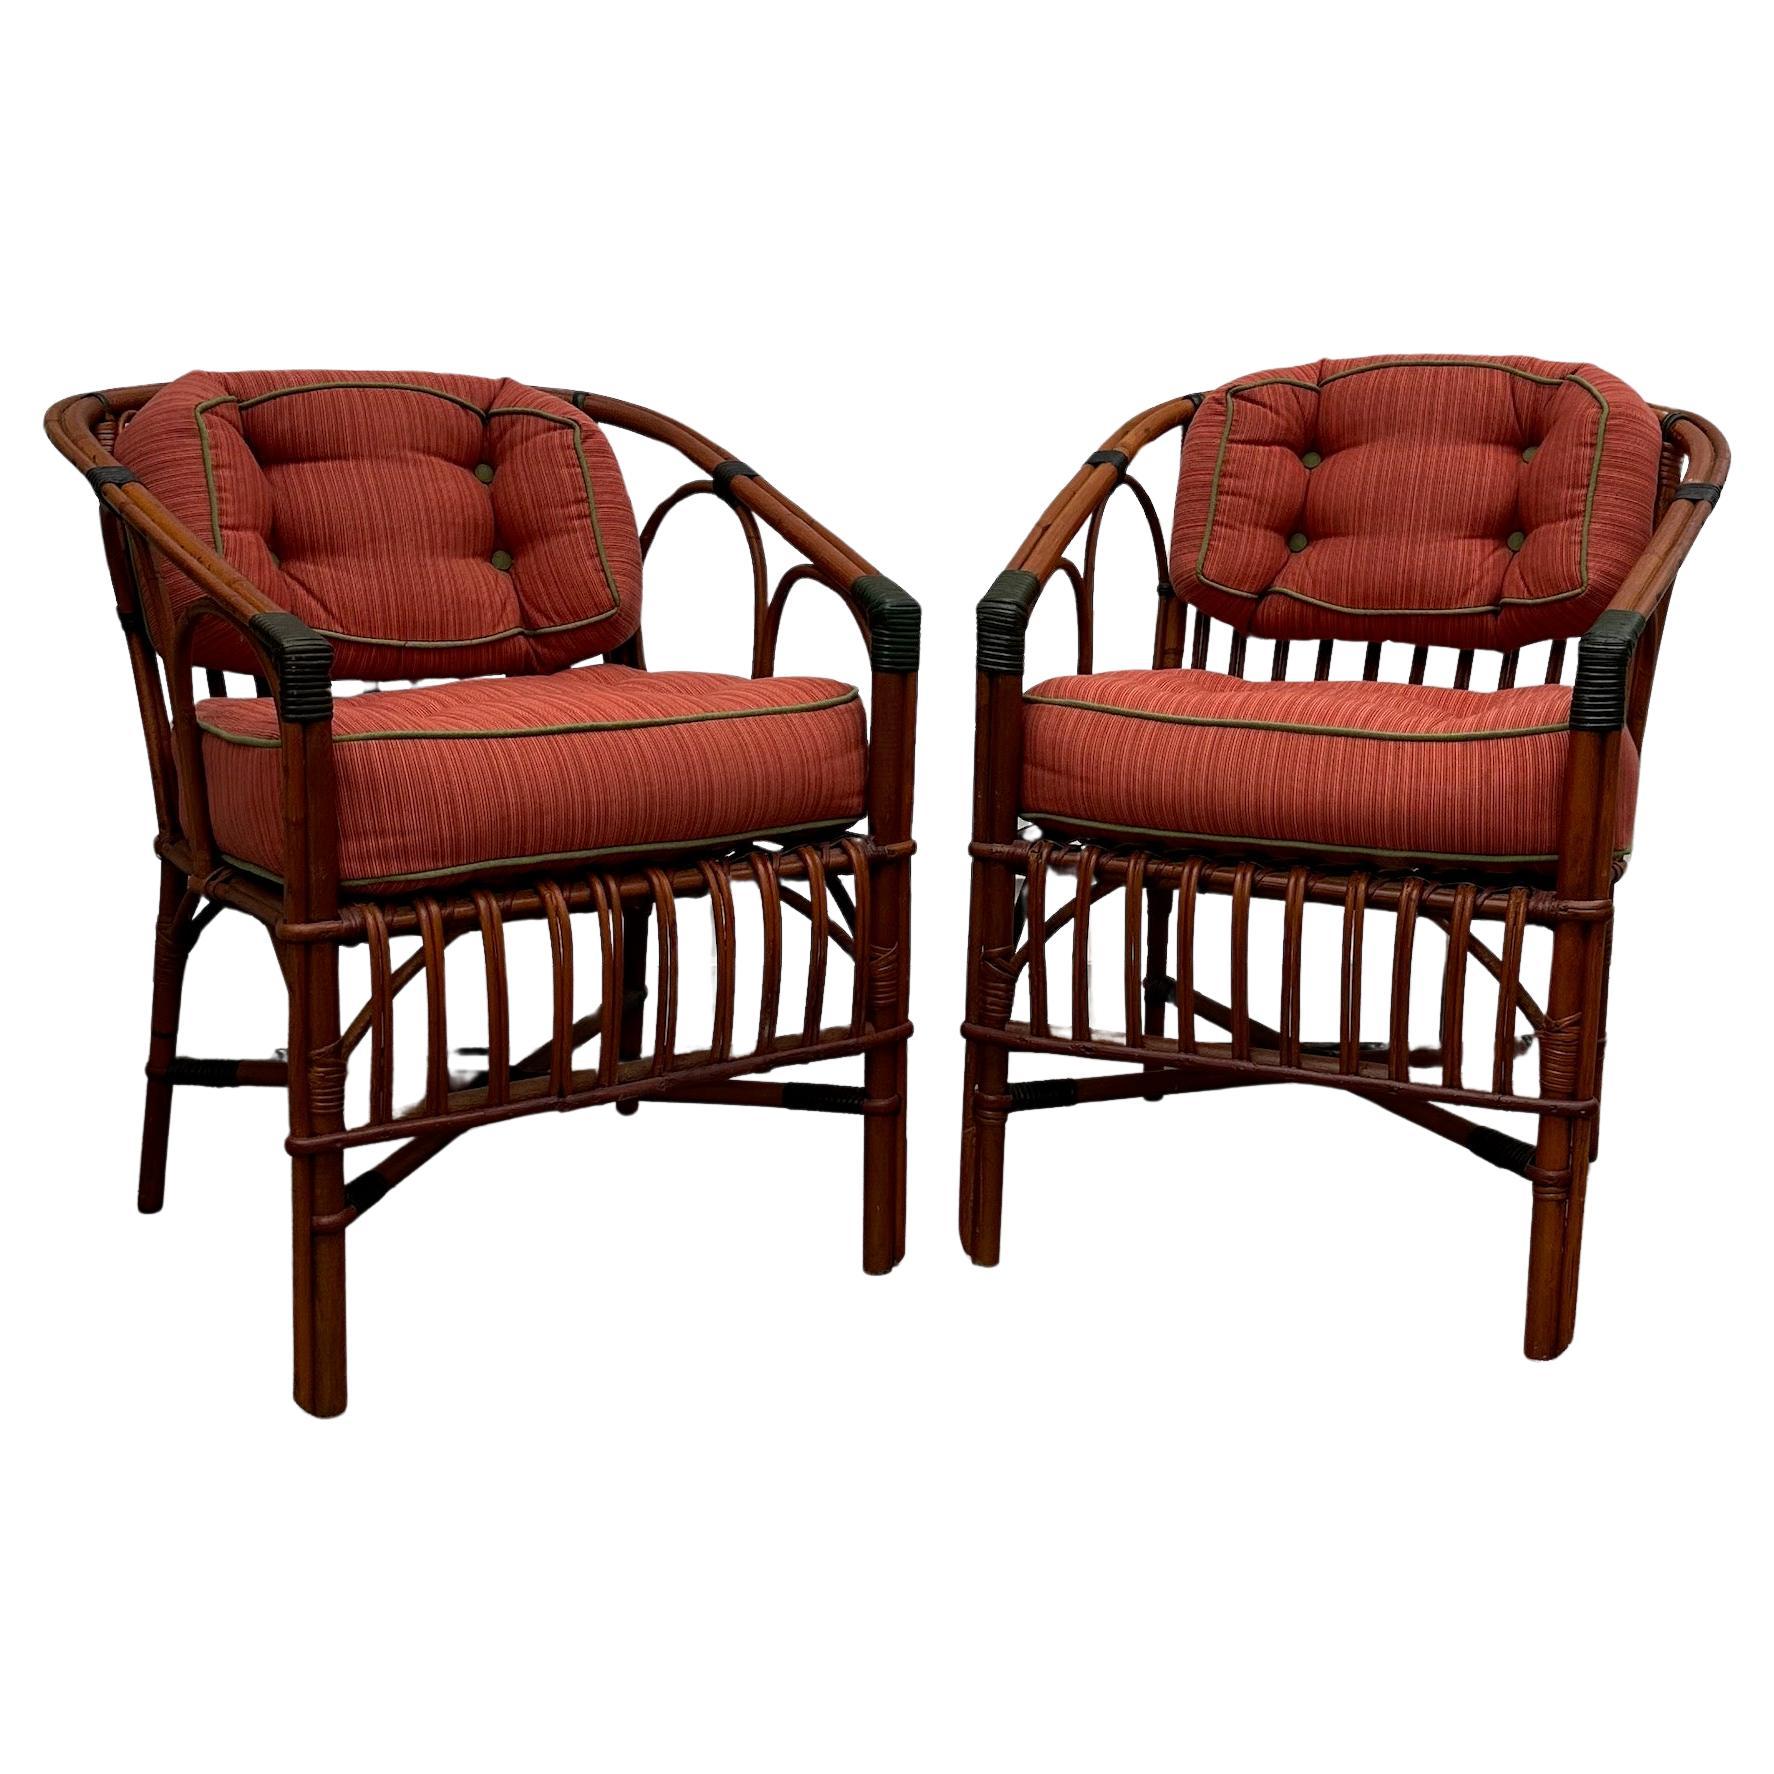 A Pair of Rattan / Bentwood Dining / Arm Chairs For Sale